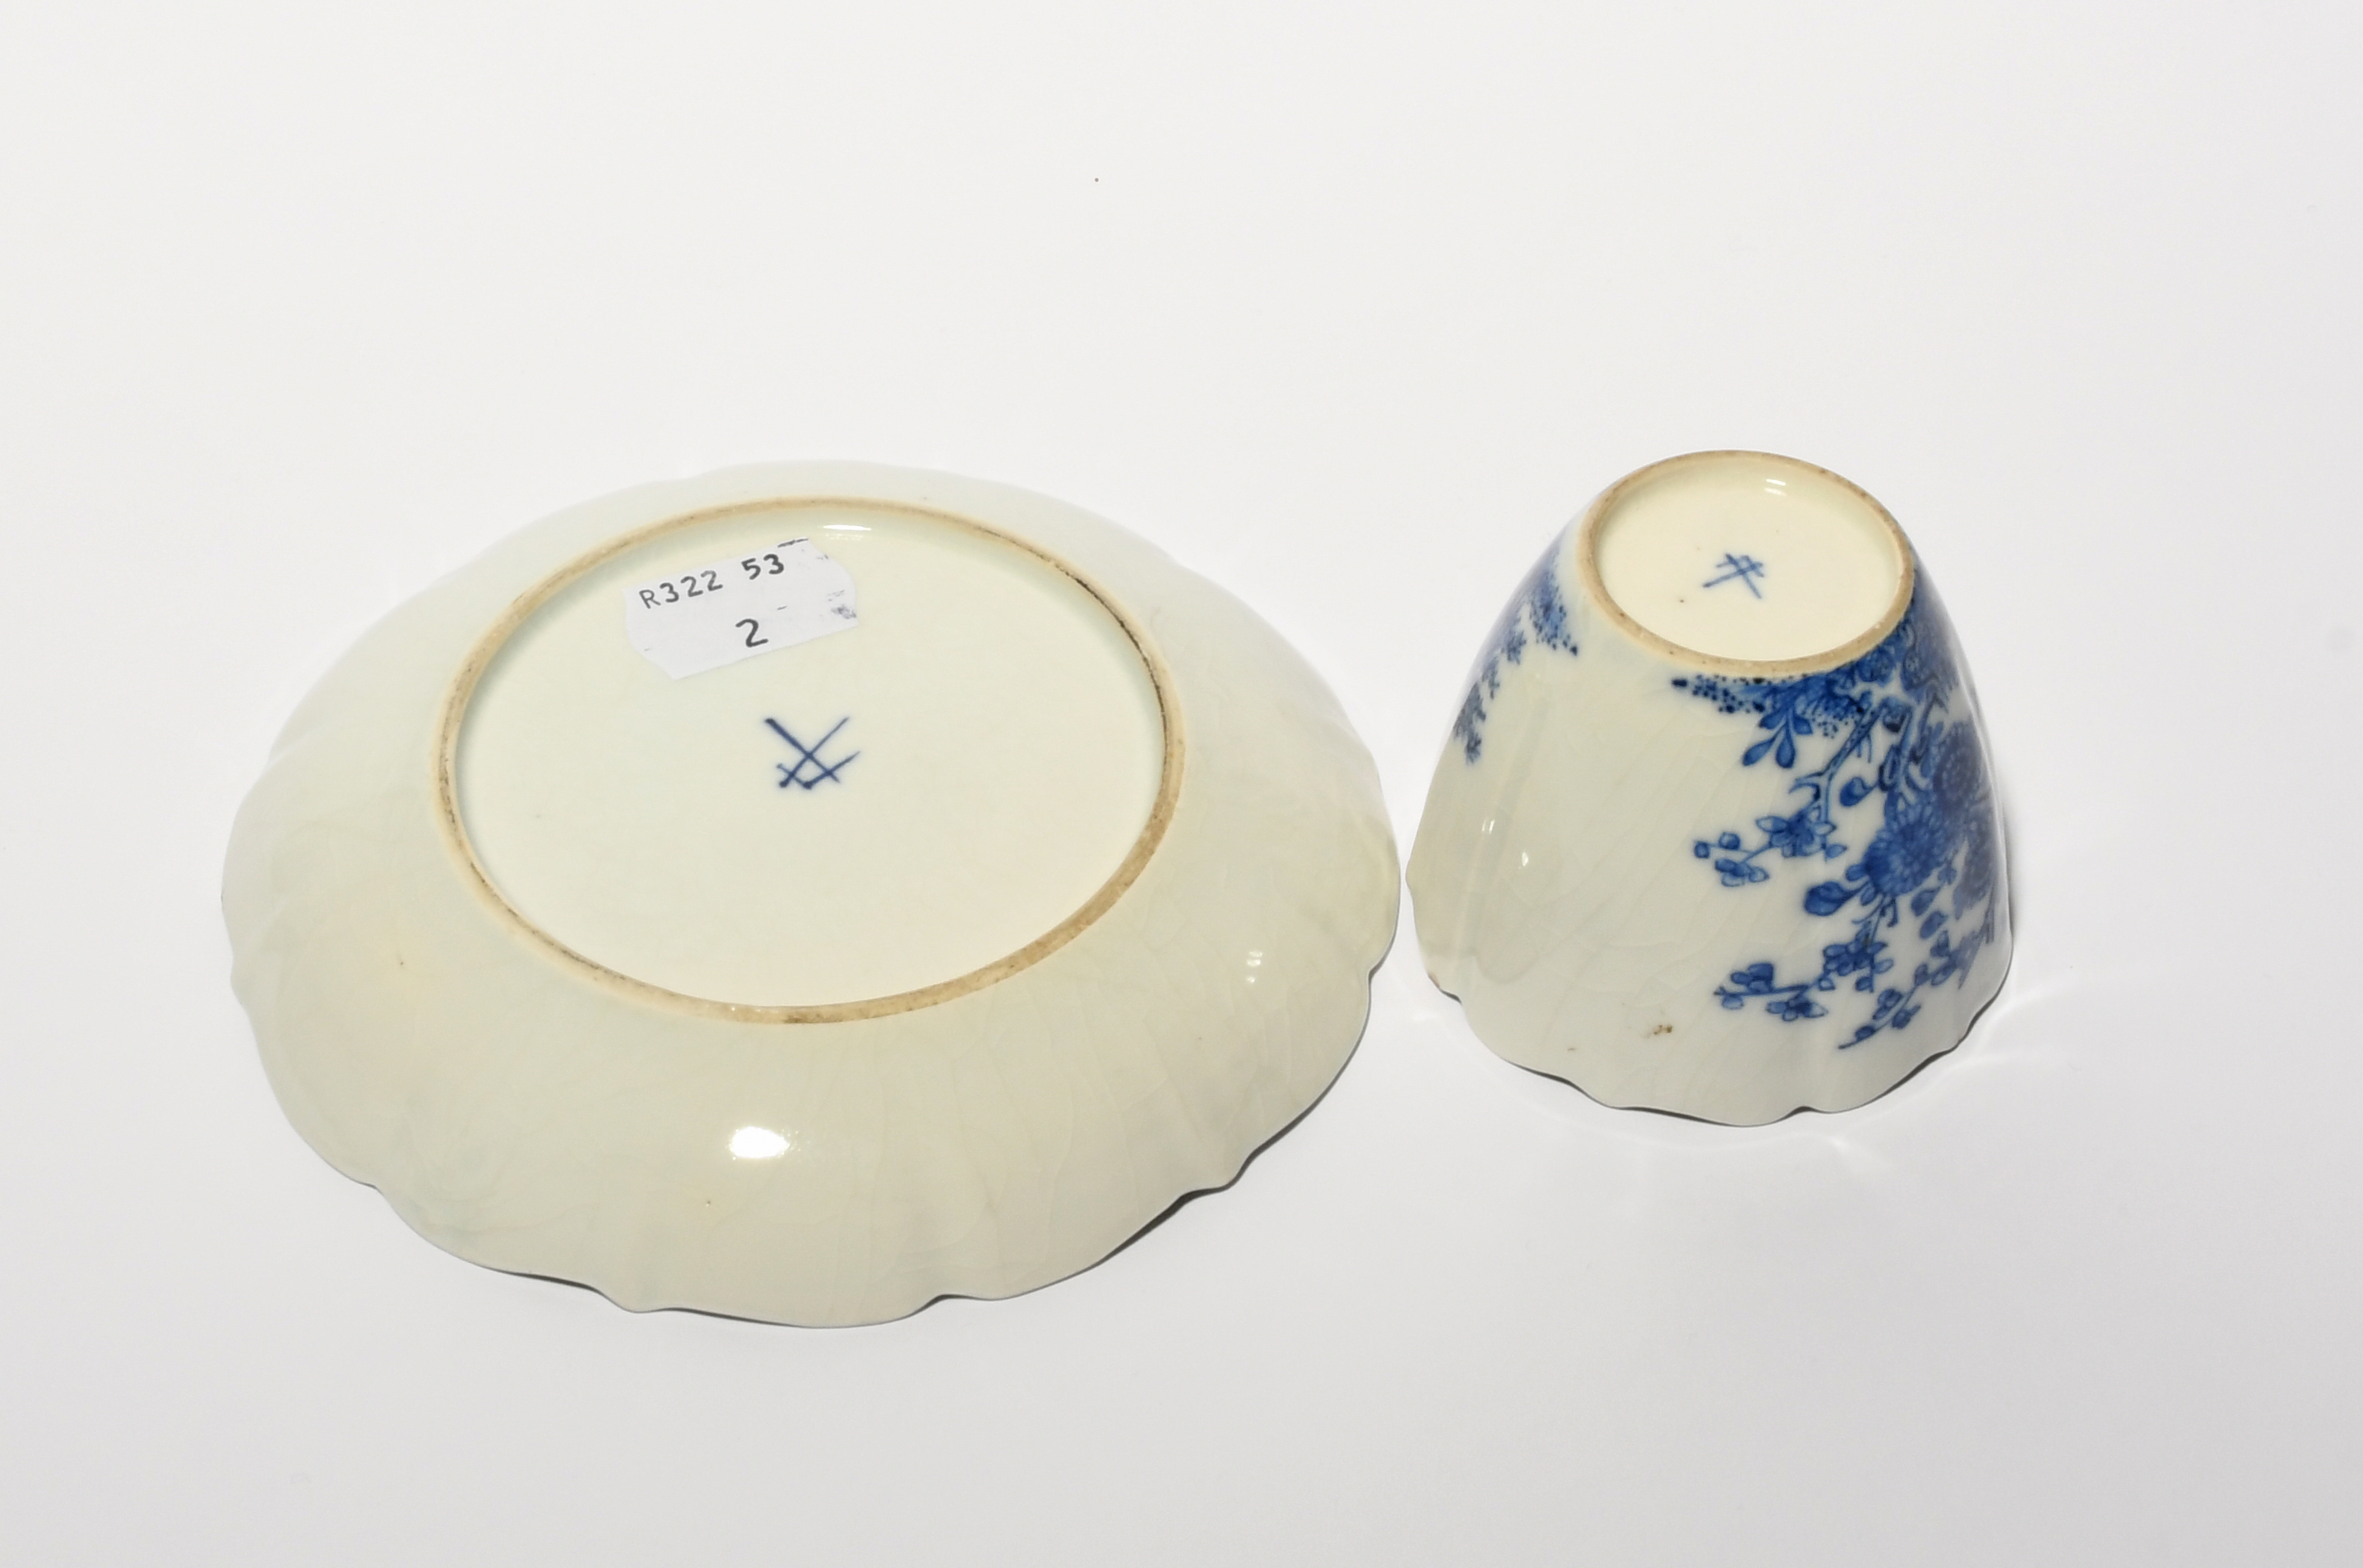 A Chinese soft-paste porcelain blue and white teabowl and saucer, mid 18th century, of lobed form, - Image 3 of 3